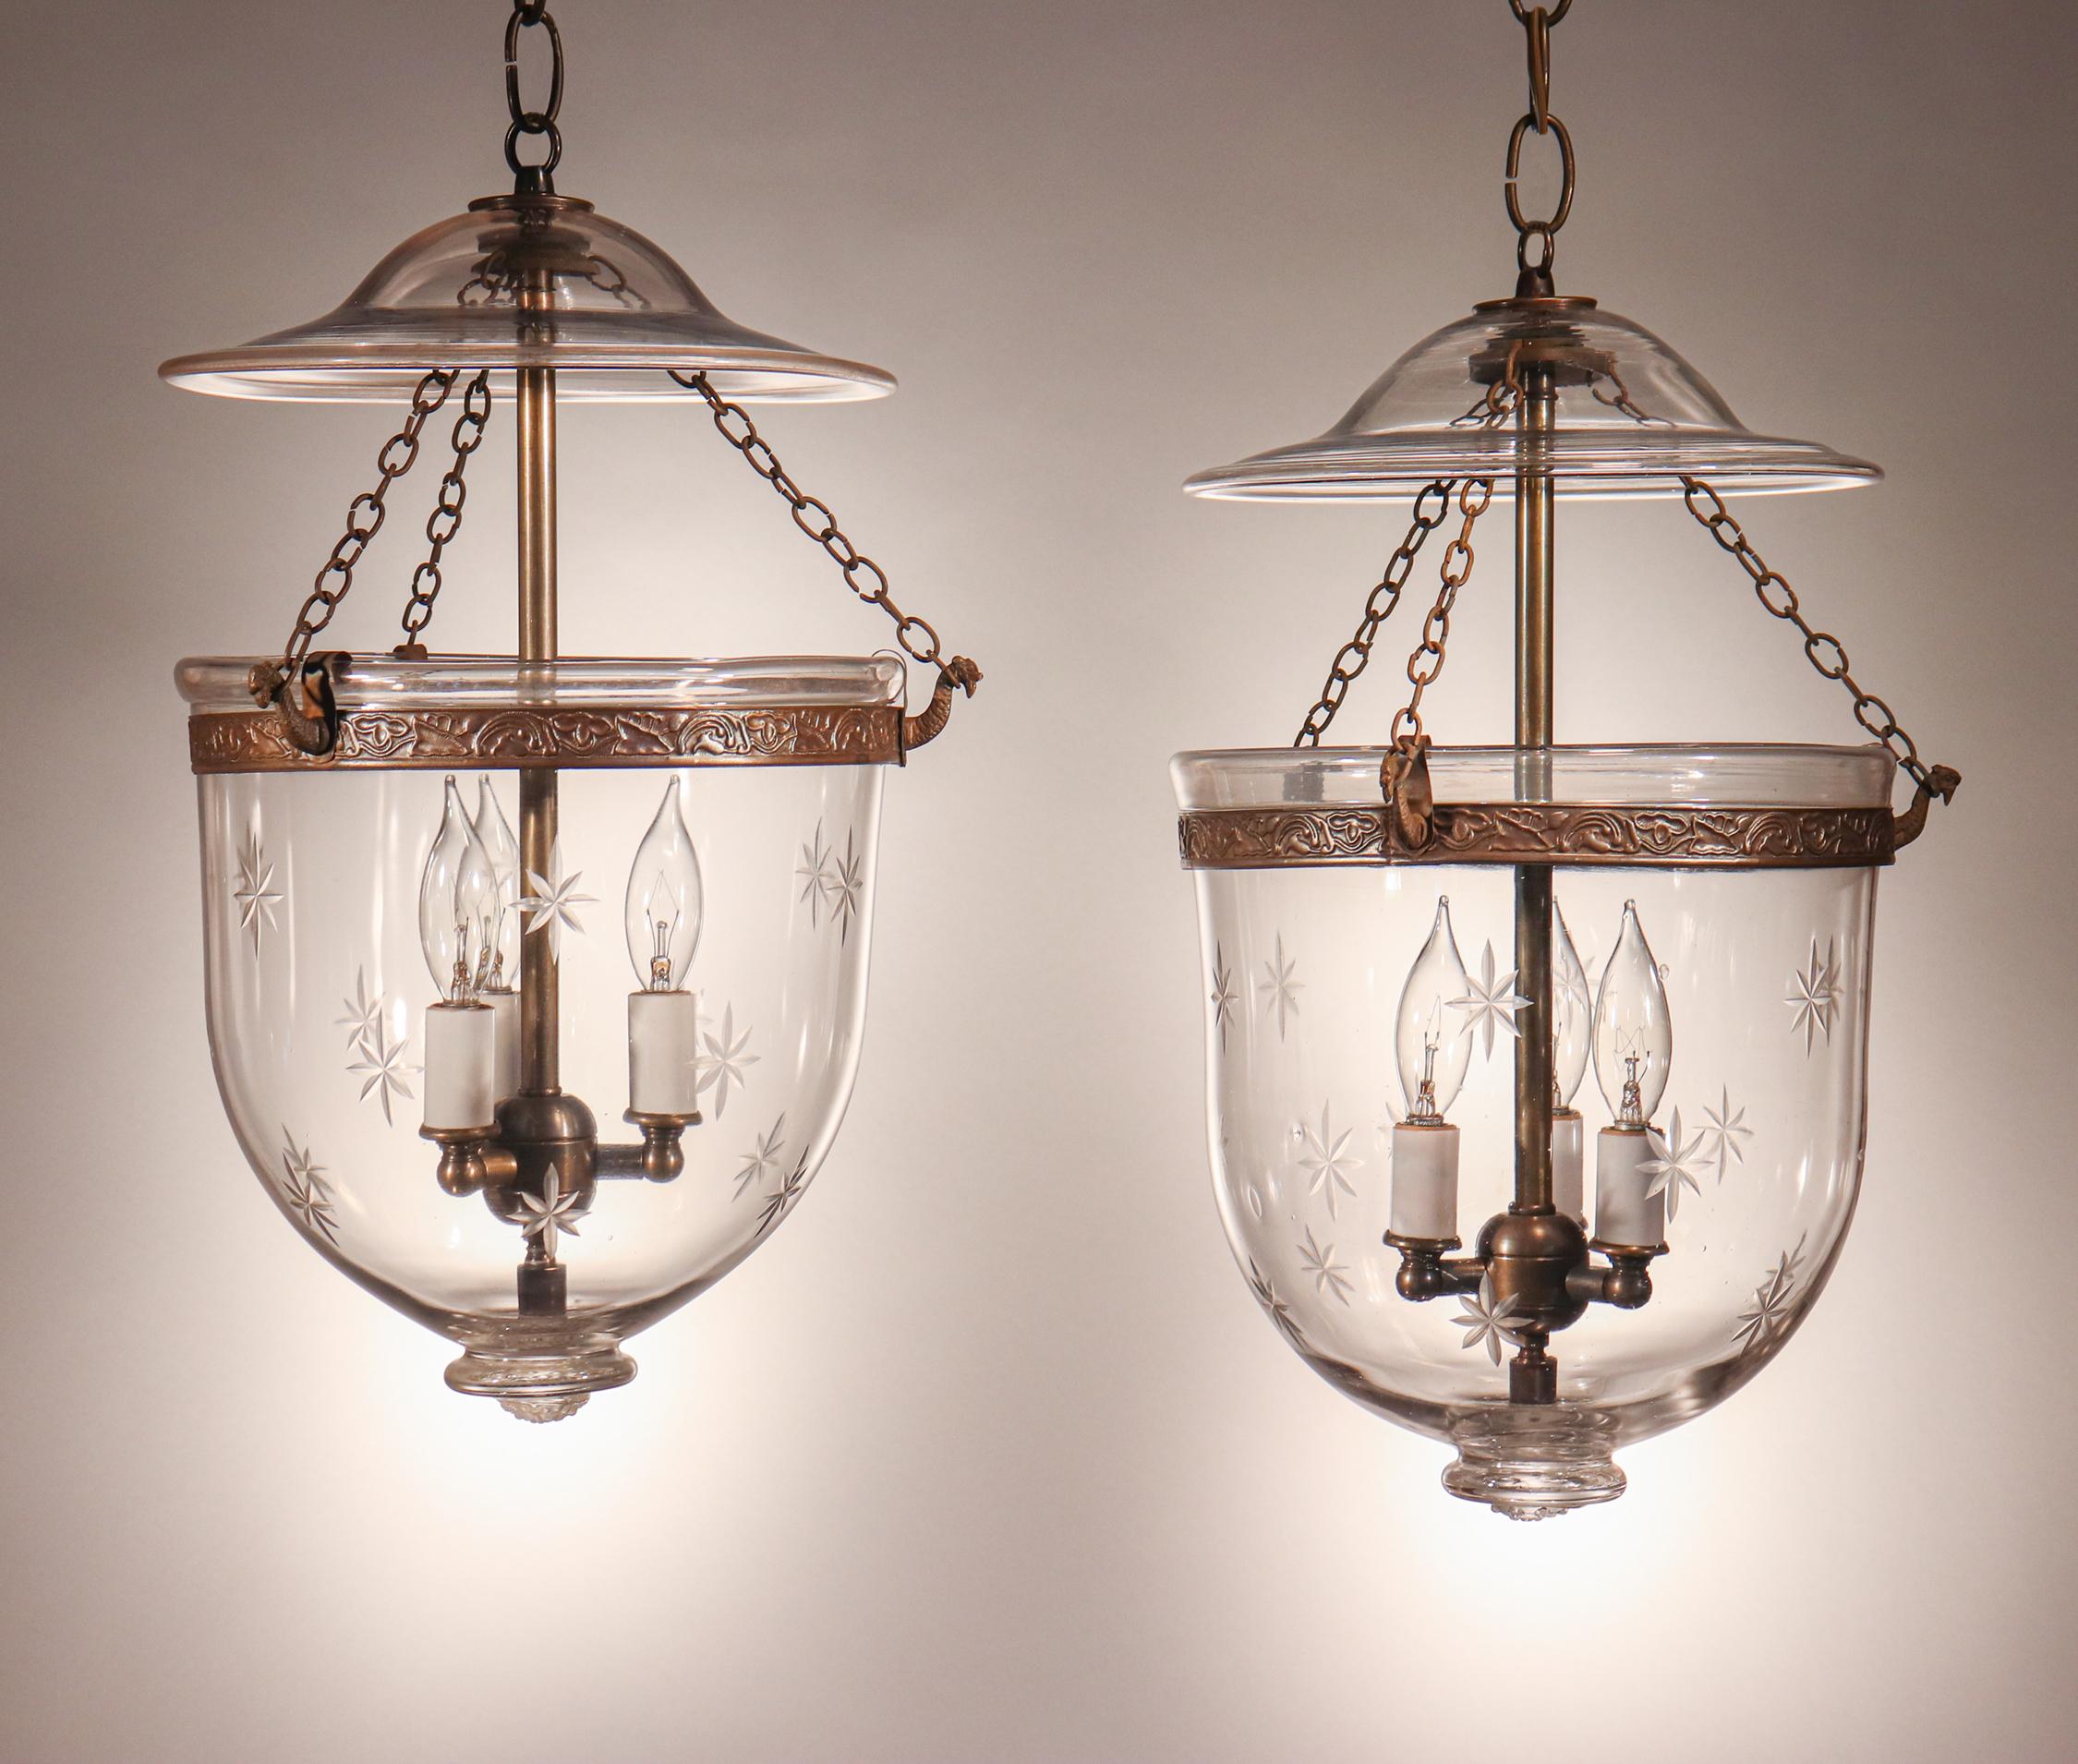 A well-matched pair of antique English bell jar lanterns with shapely form and an etched star motif. These circa 1870 pendants are of excellent quality, with desirable tiny air bubbles in the hand blown glass. The brass bands, which have an embossed